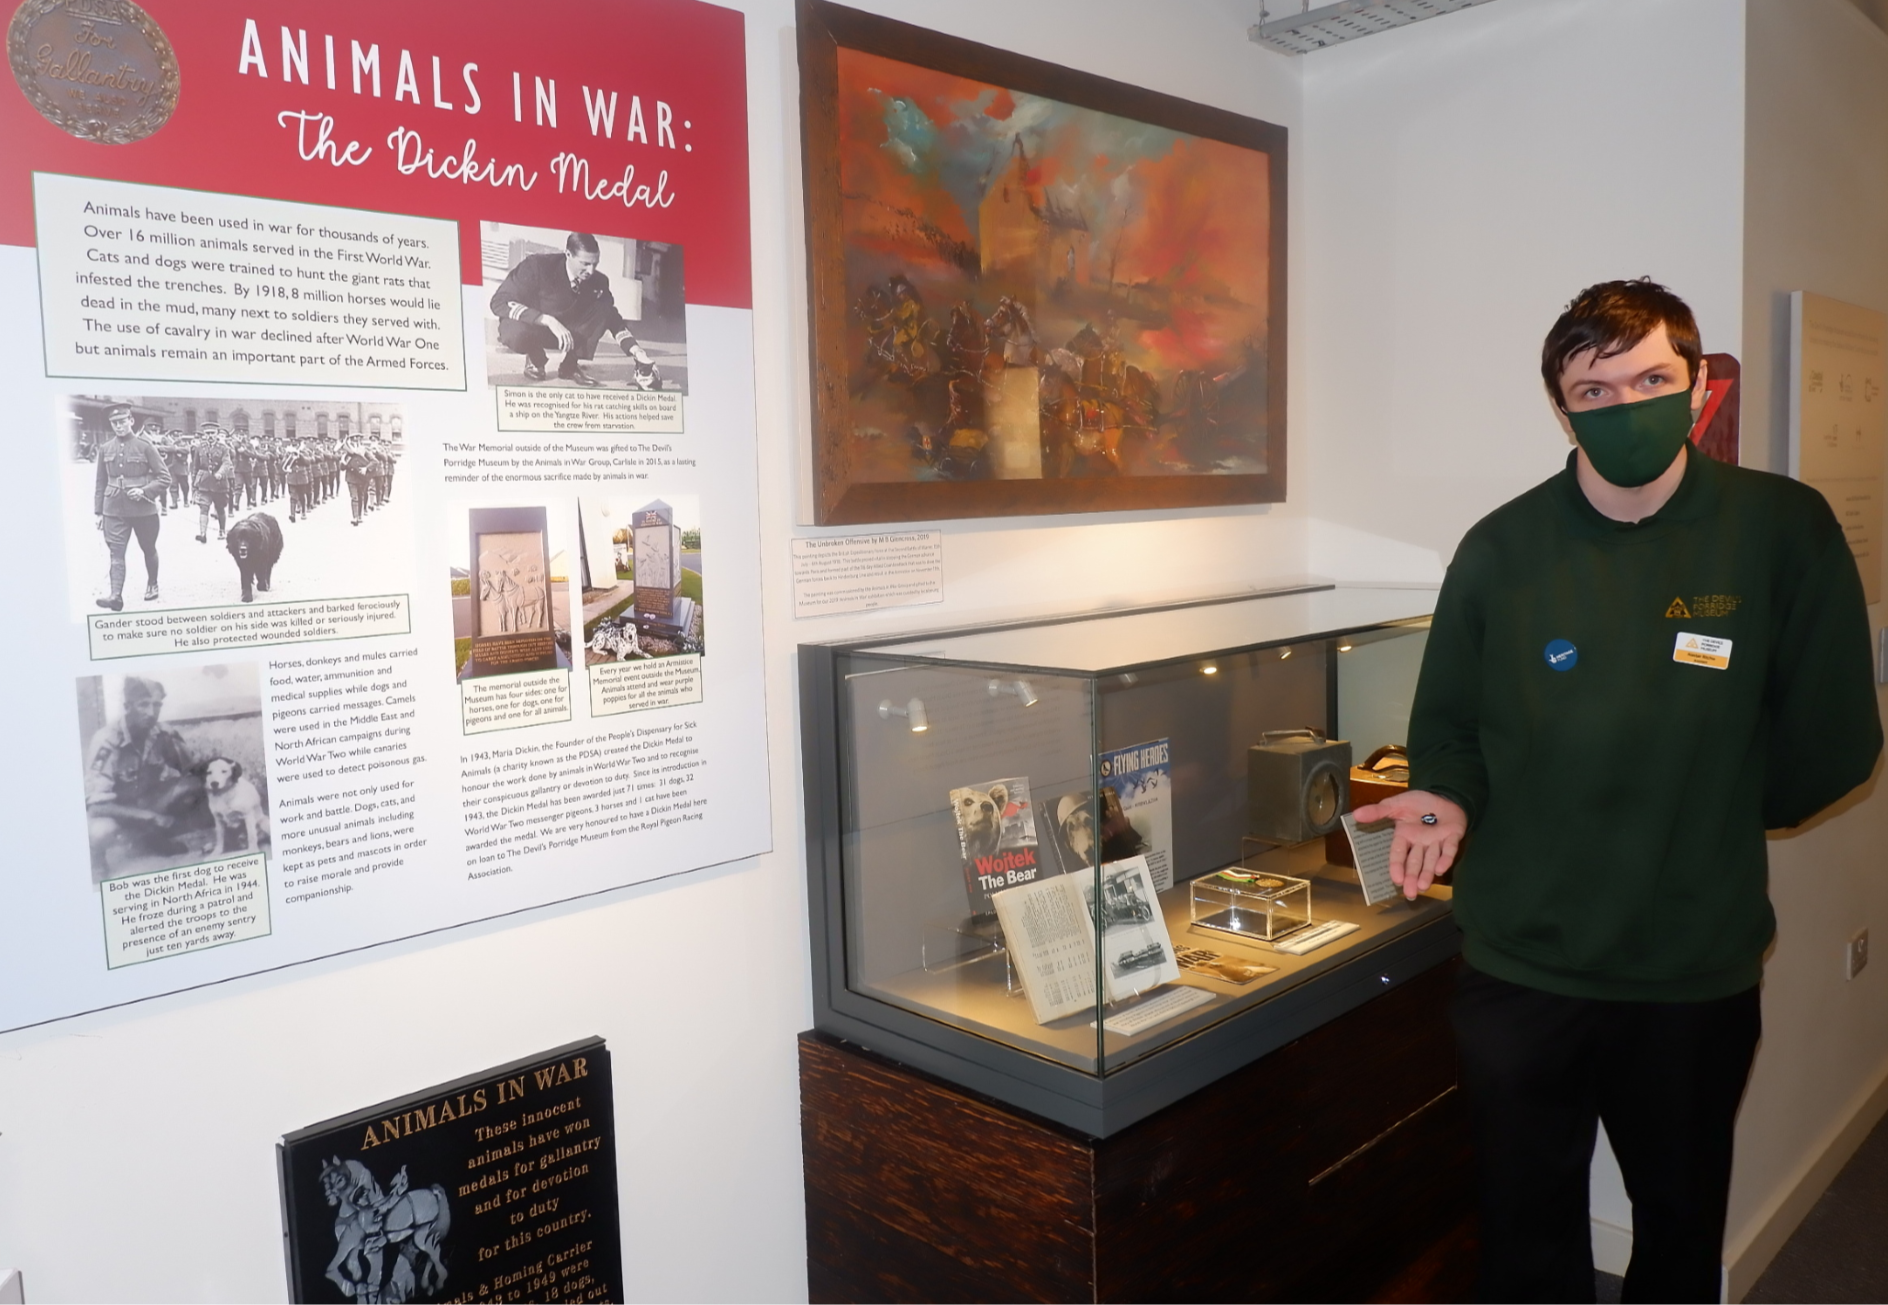 A young person holding a badge in front of The Animals in War display.